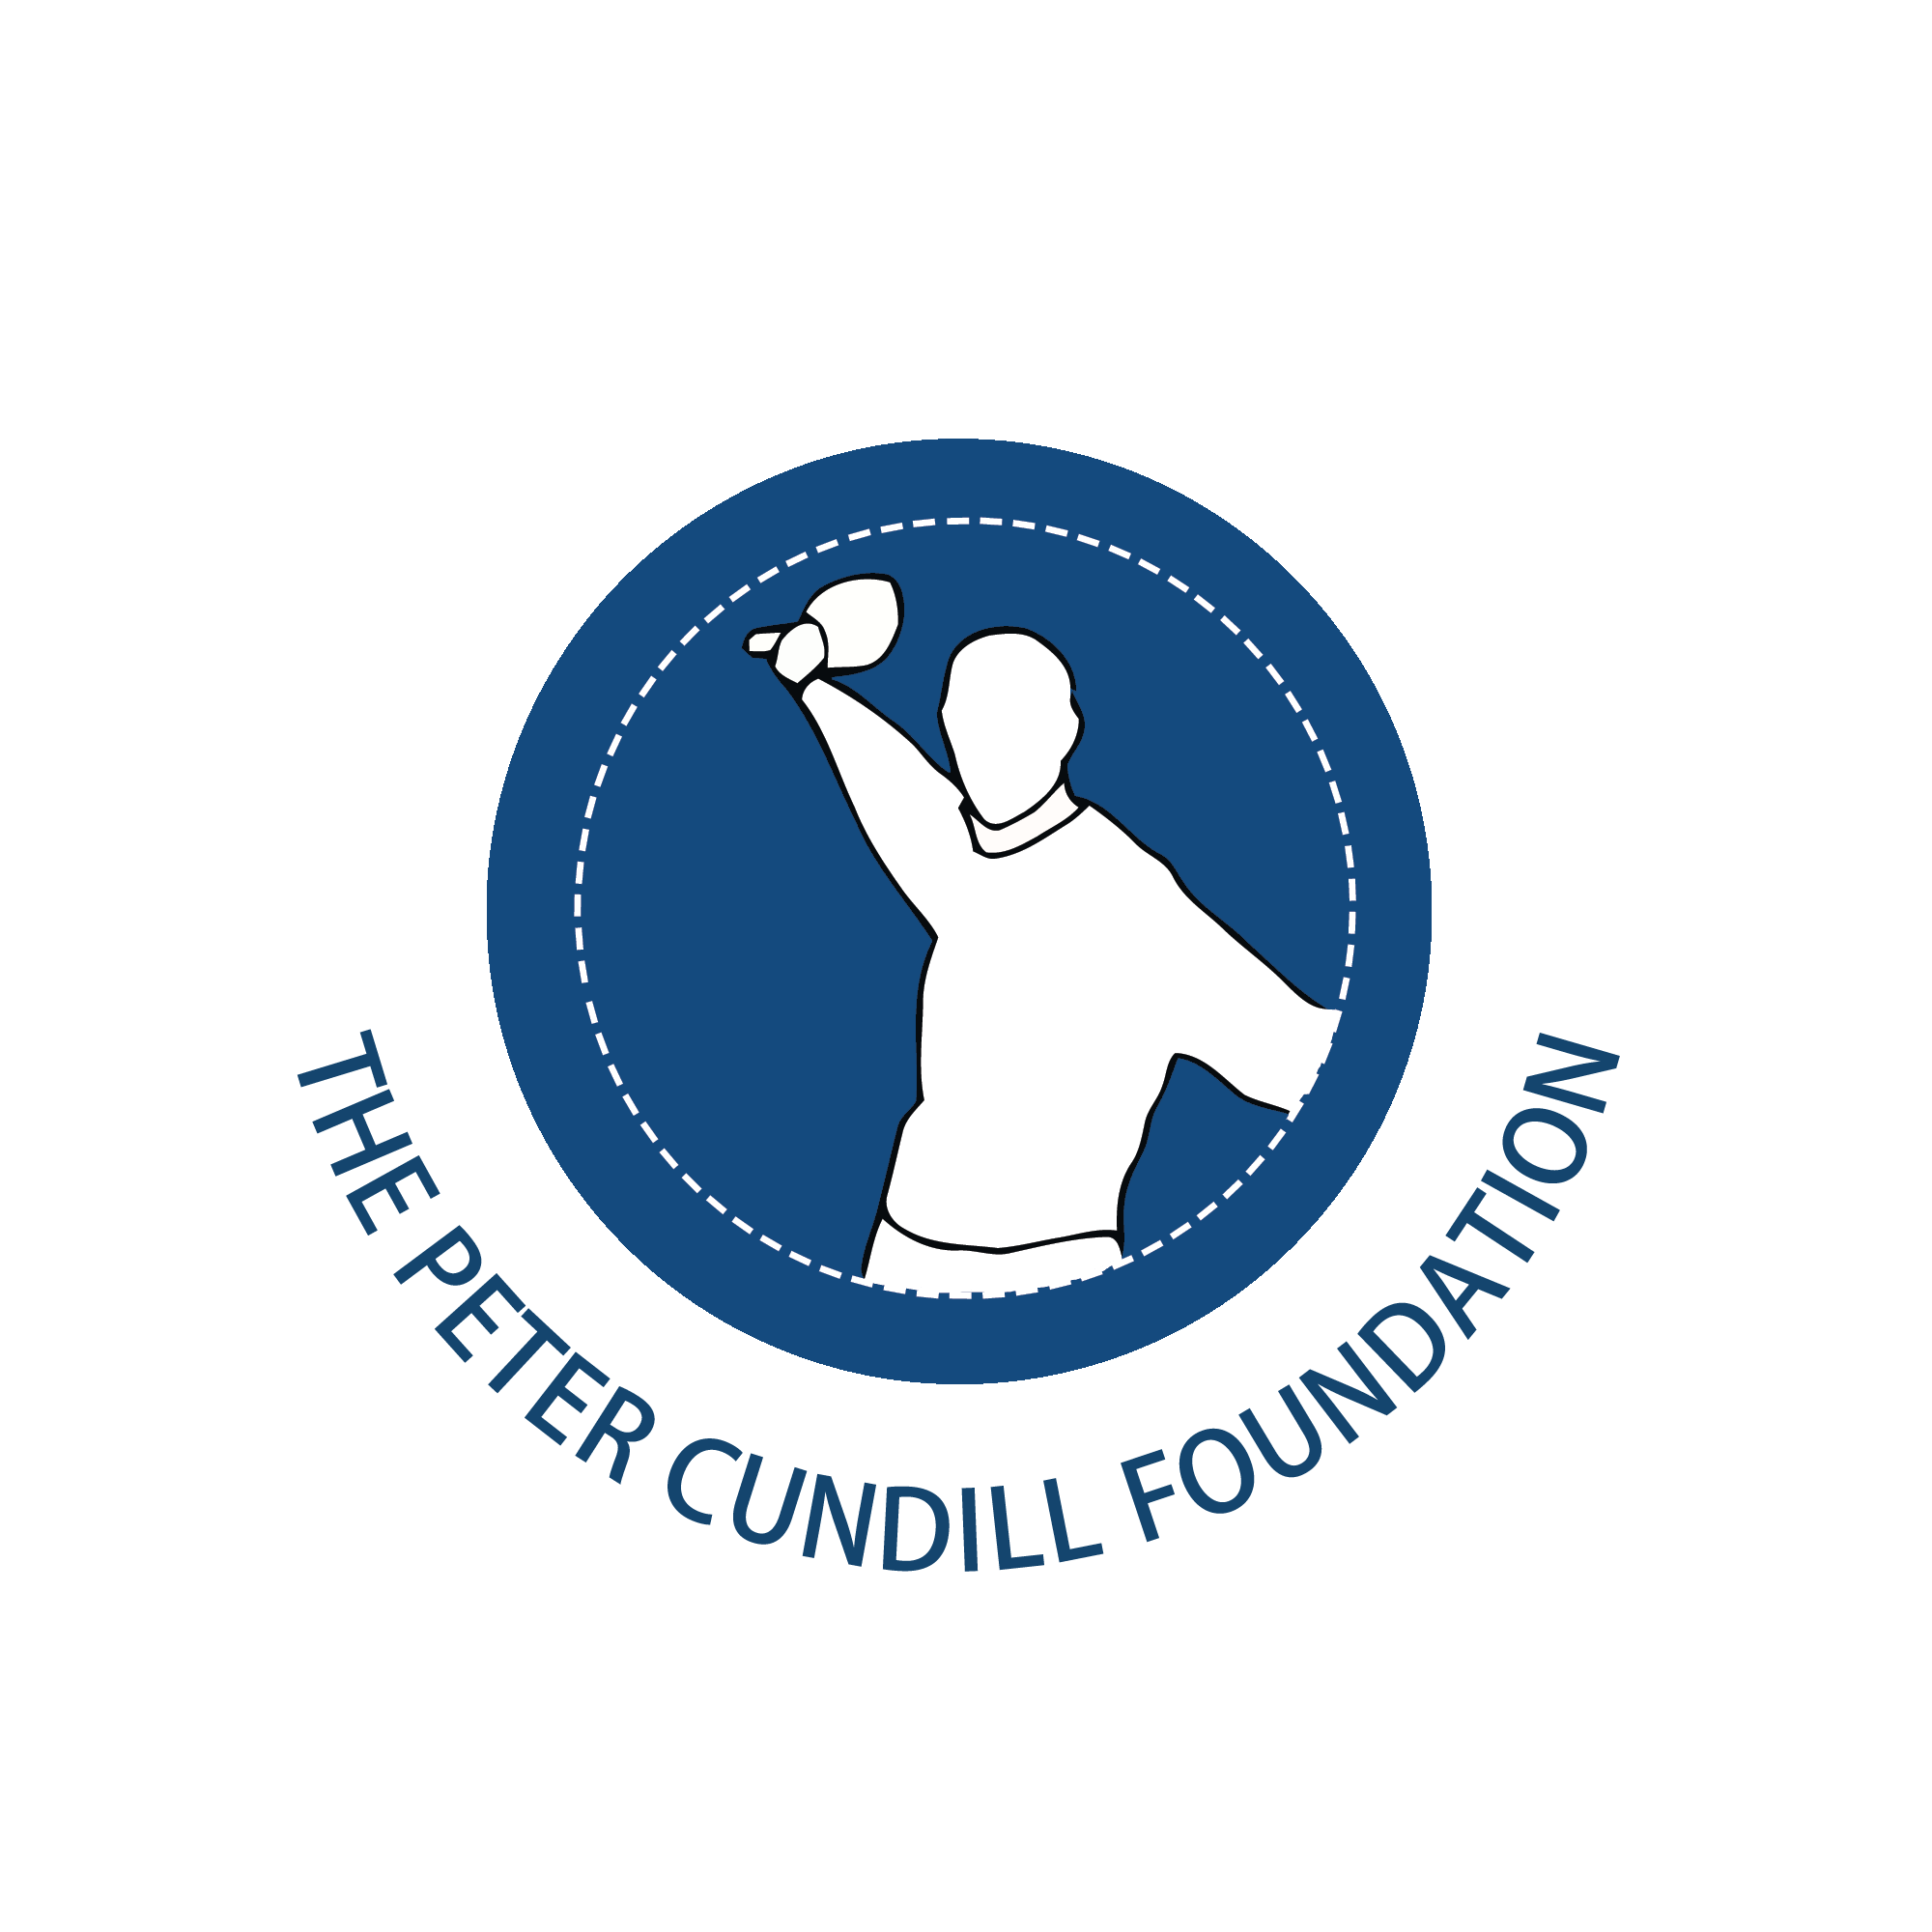 The Peter Cundill Foundation